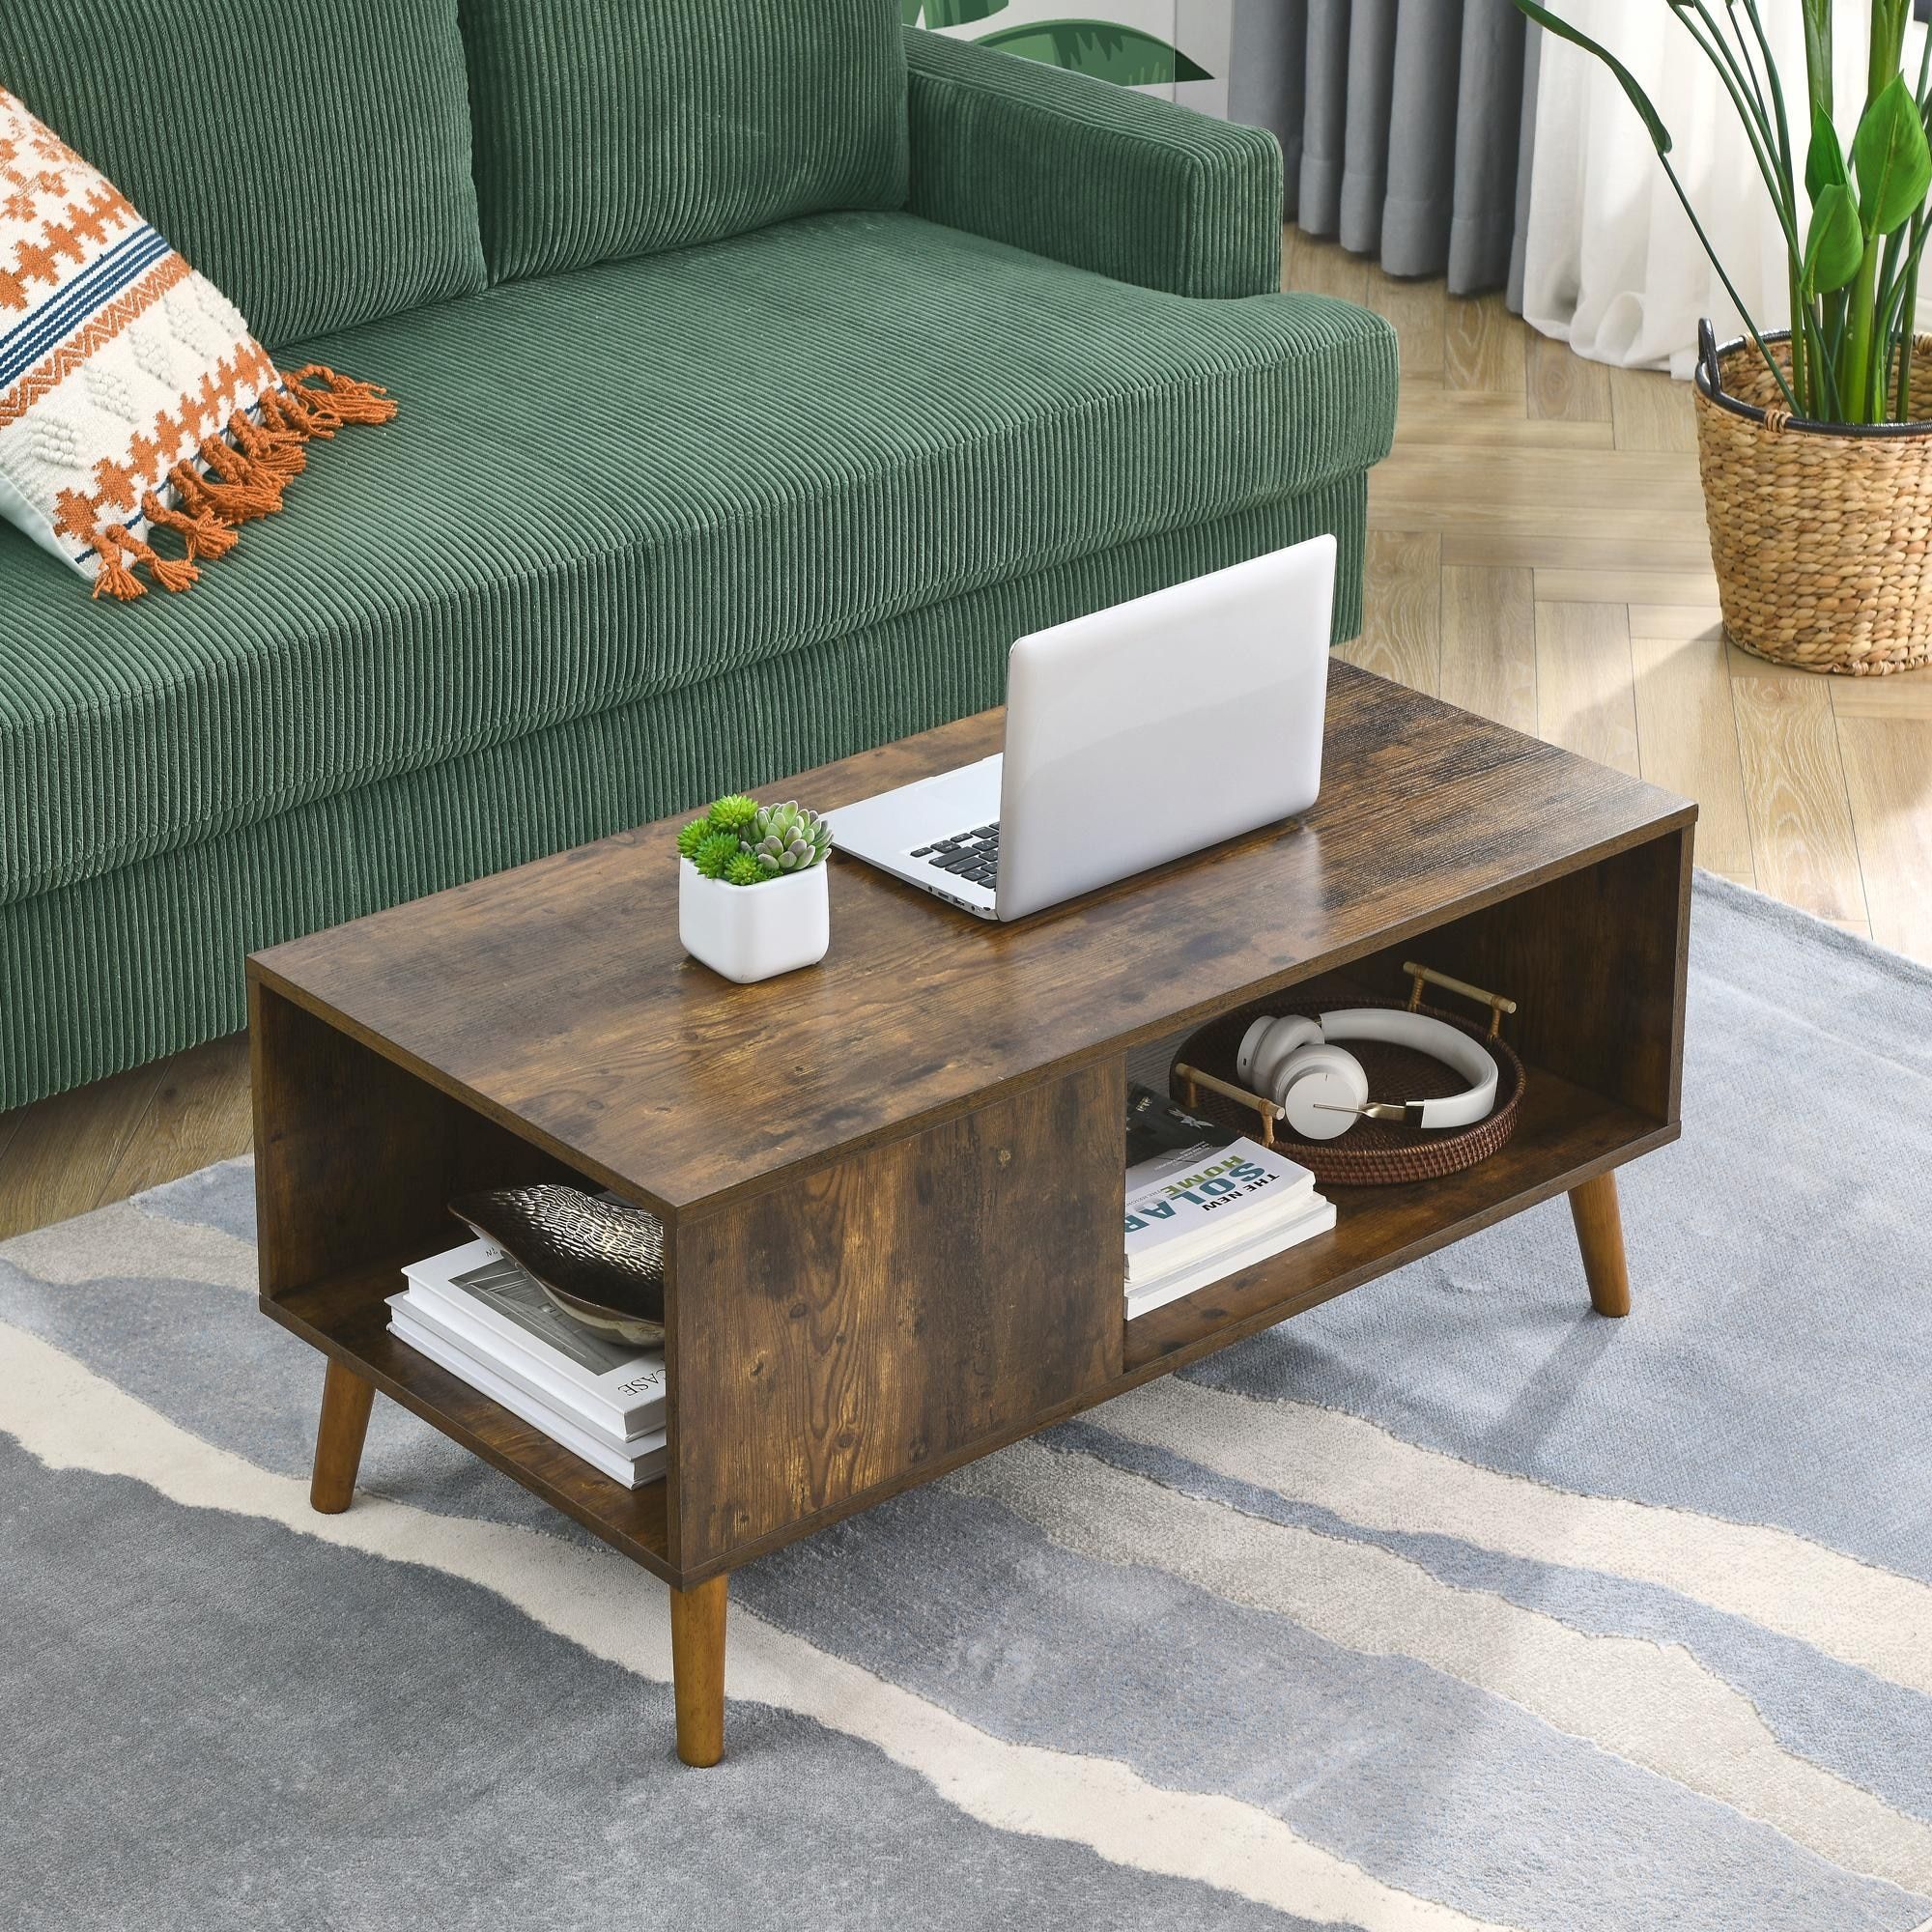 Stylish Coffee Table With Open Storage Shelf For Living Room Decor – On  Sale – Bed Bath & Beyond – 38423210 Throughout Coffee Tables With Open Storage Shelves (Photo 4 of 15)